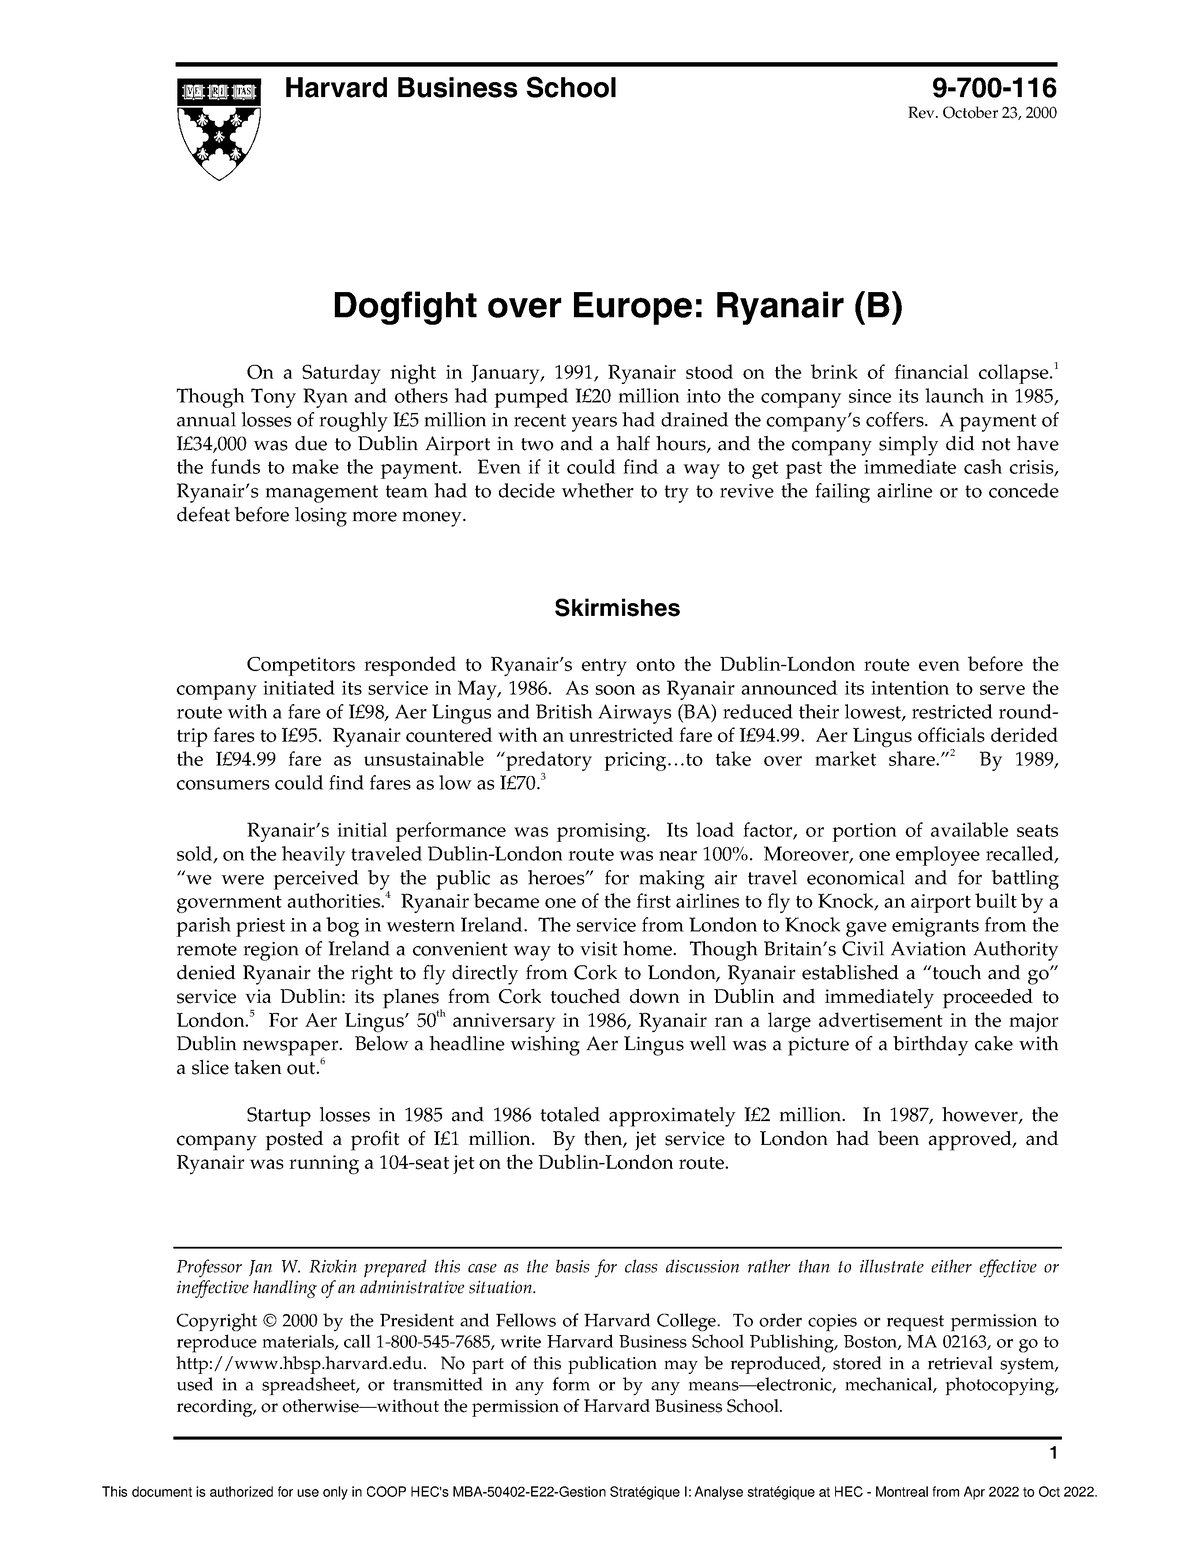 dogfight over europe ryanair case study solution